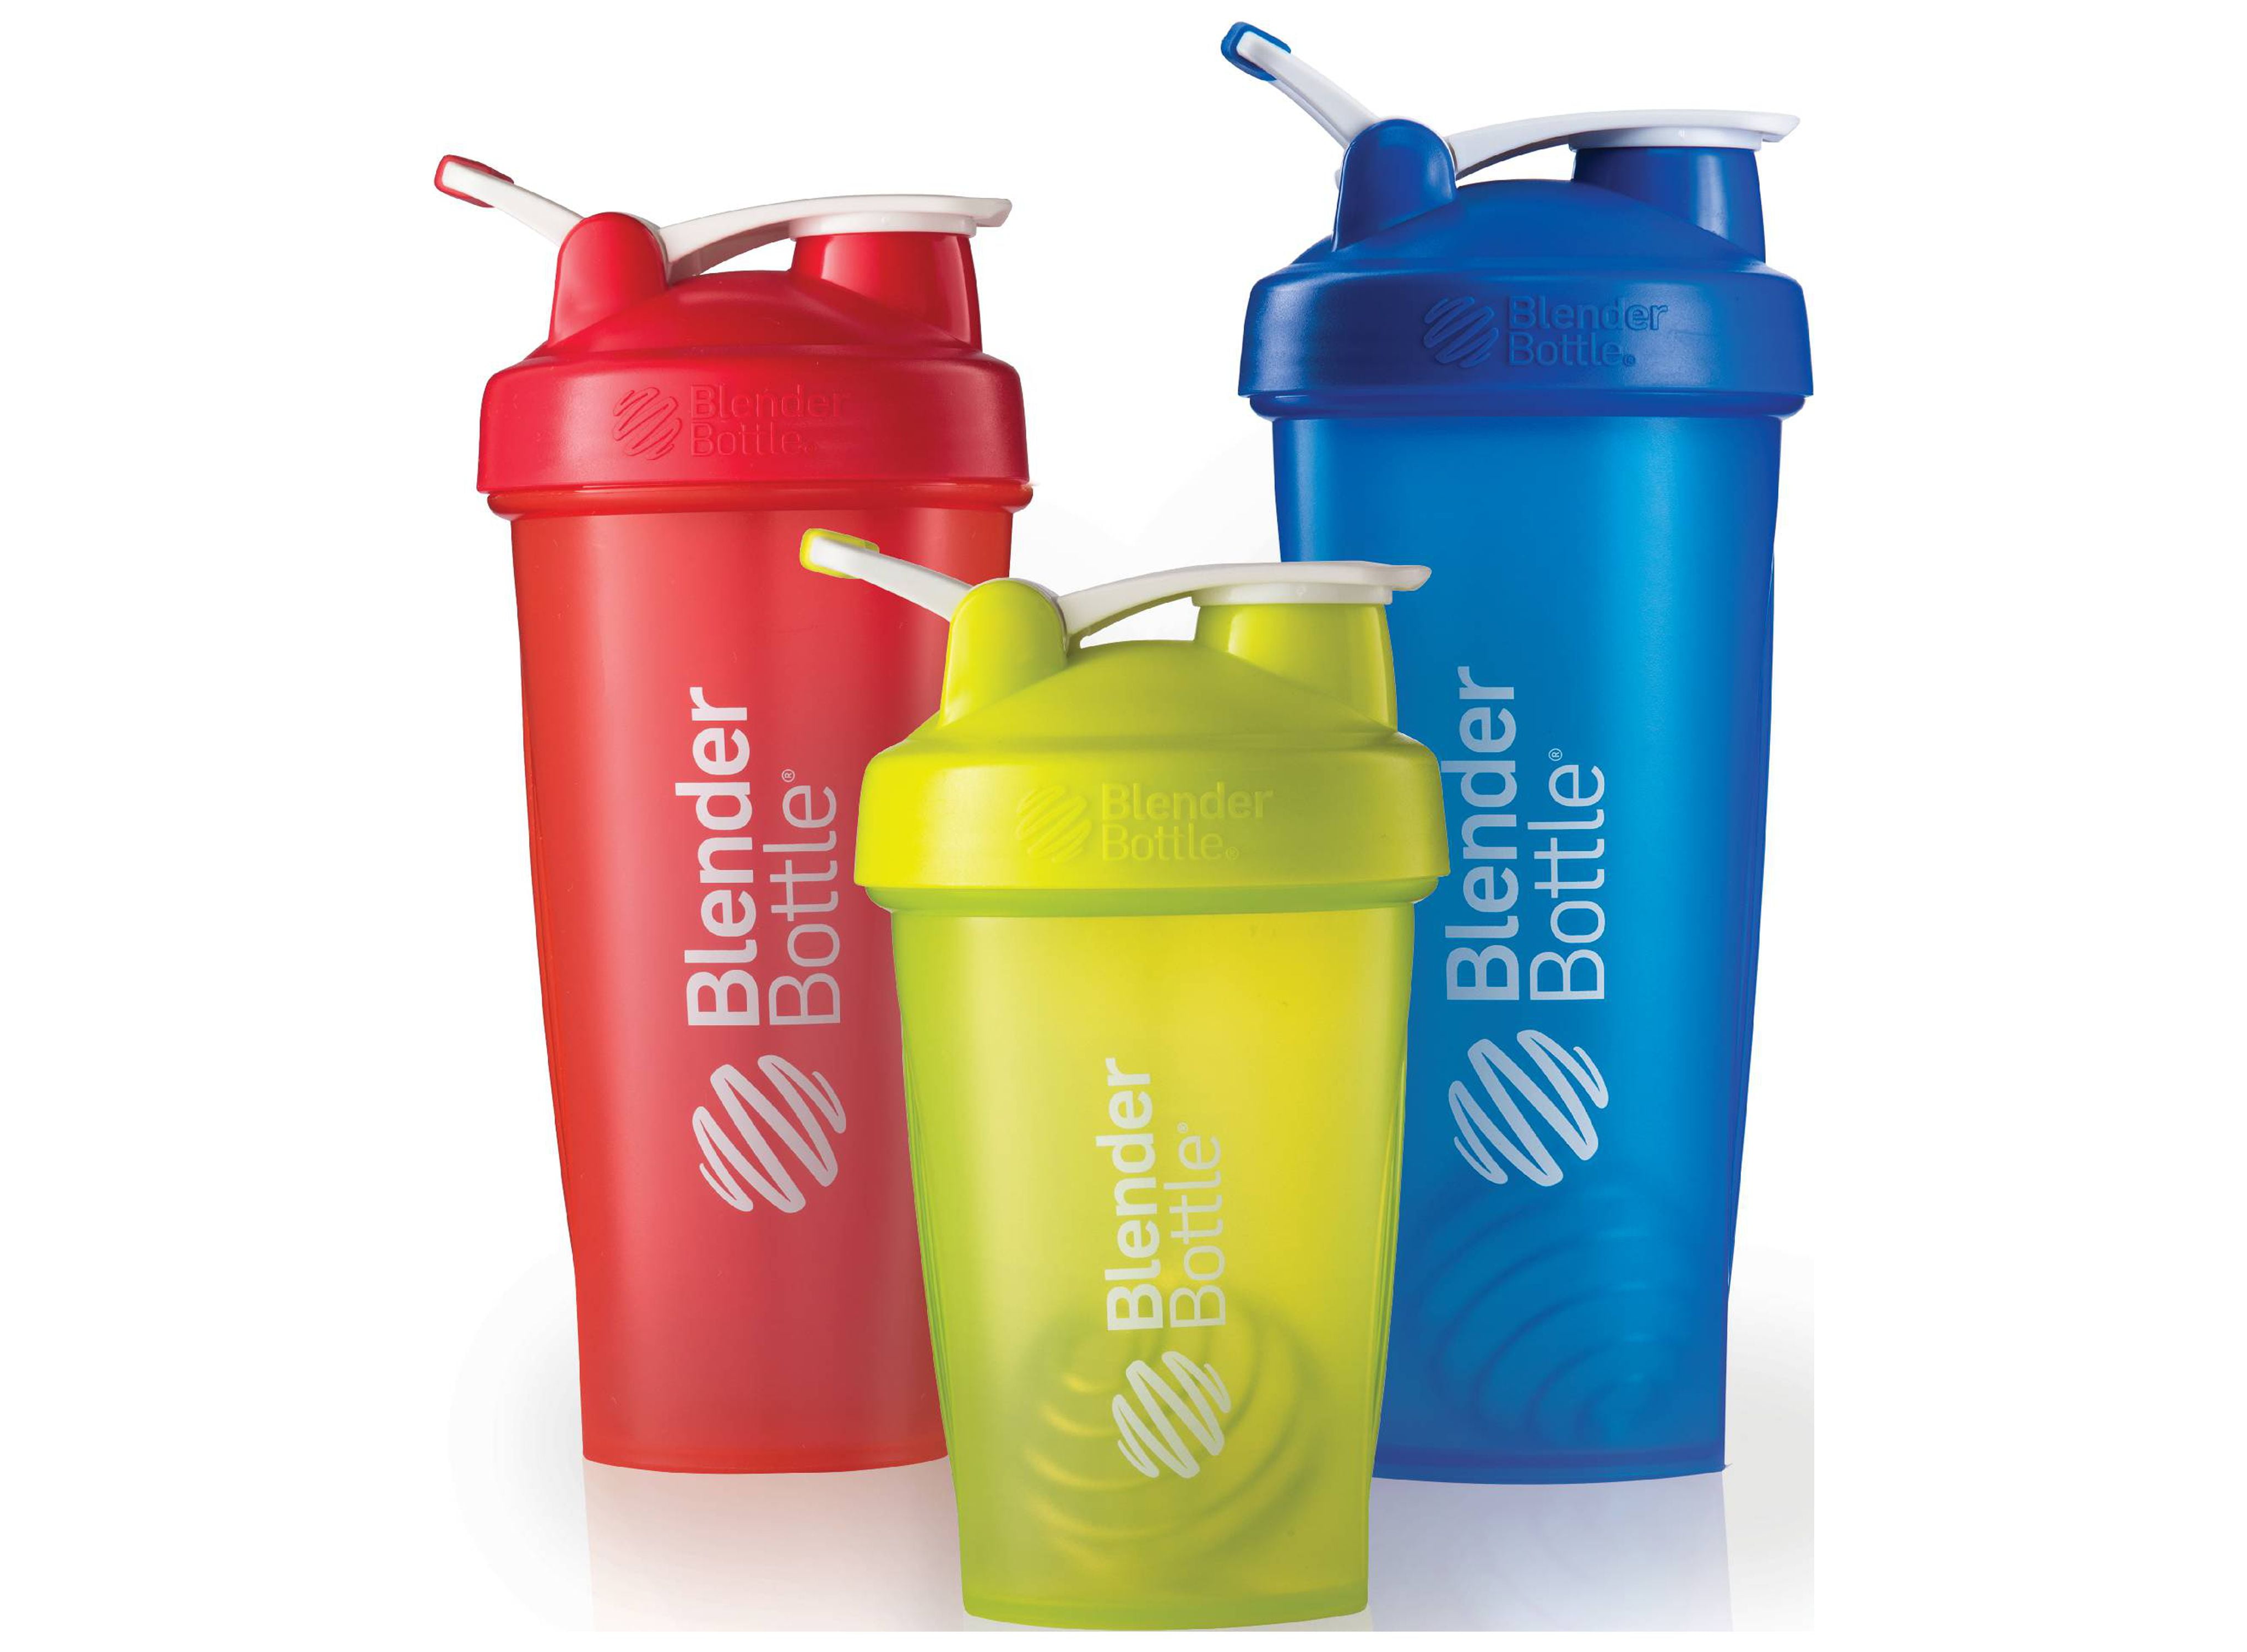 Classic Blender Bottle With Loop, 28 Fl Oz, 1 each at Whole Foods Market